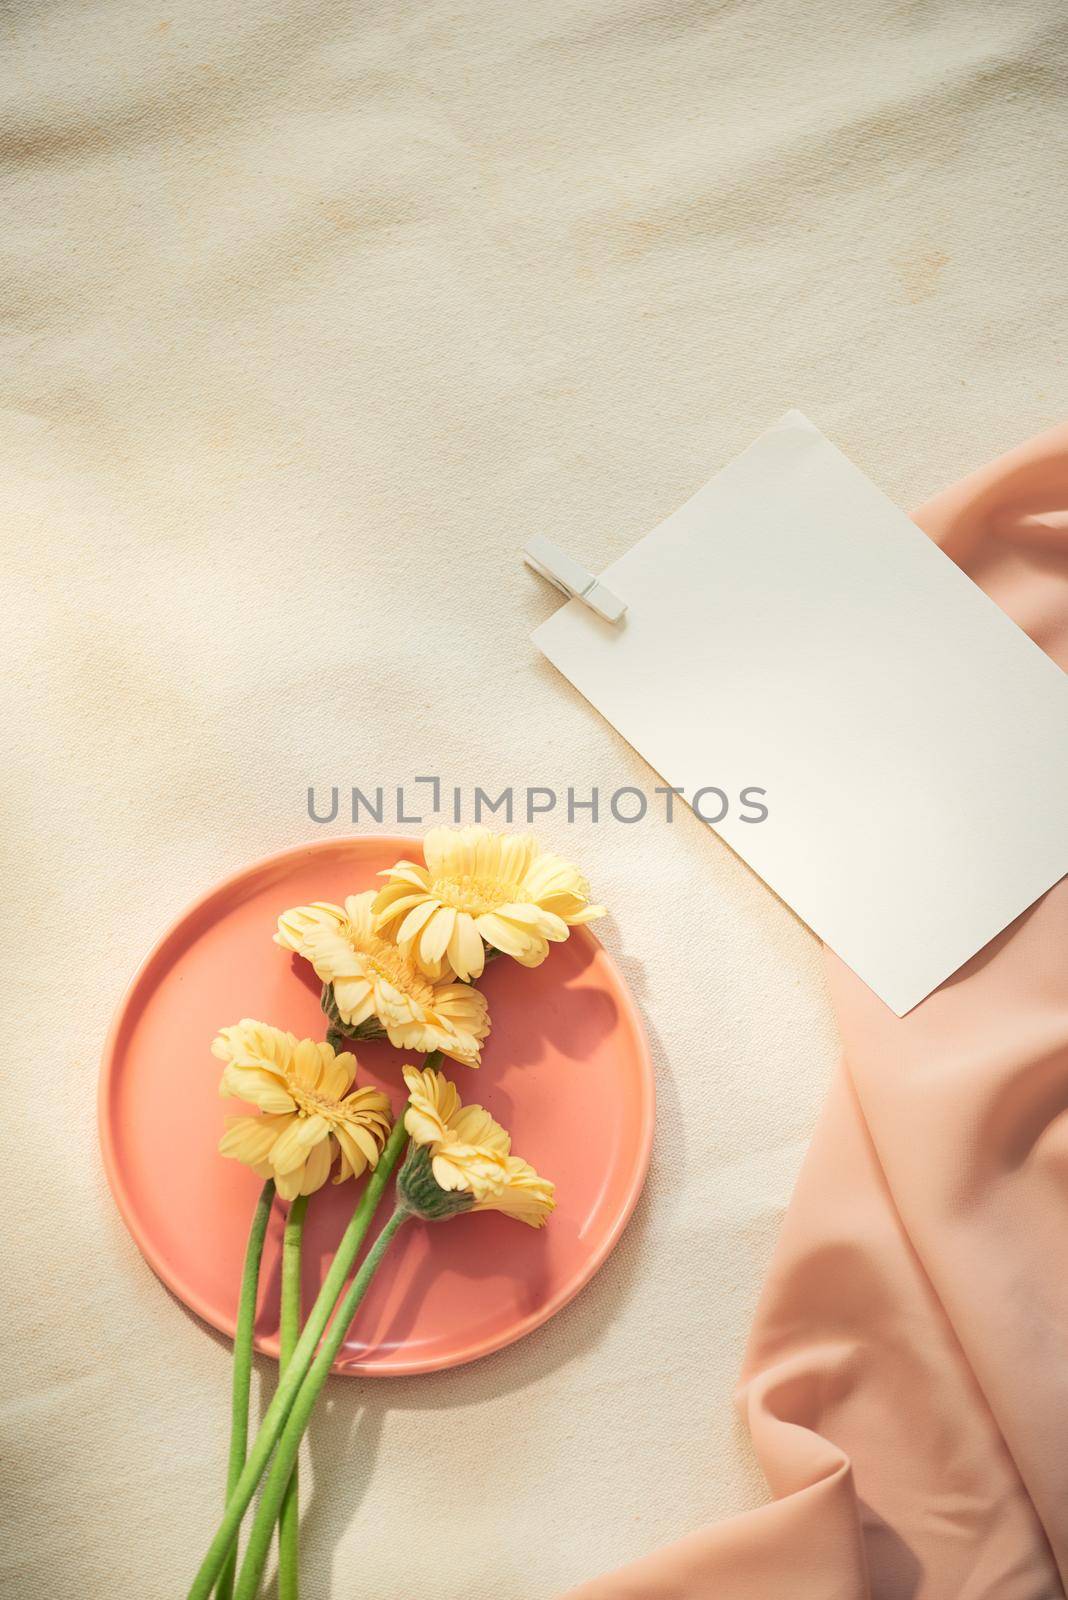 Flowers on the plate with fabric and paper on yellow background 